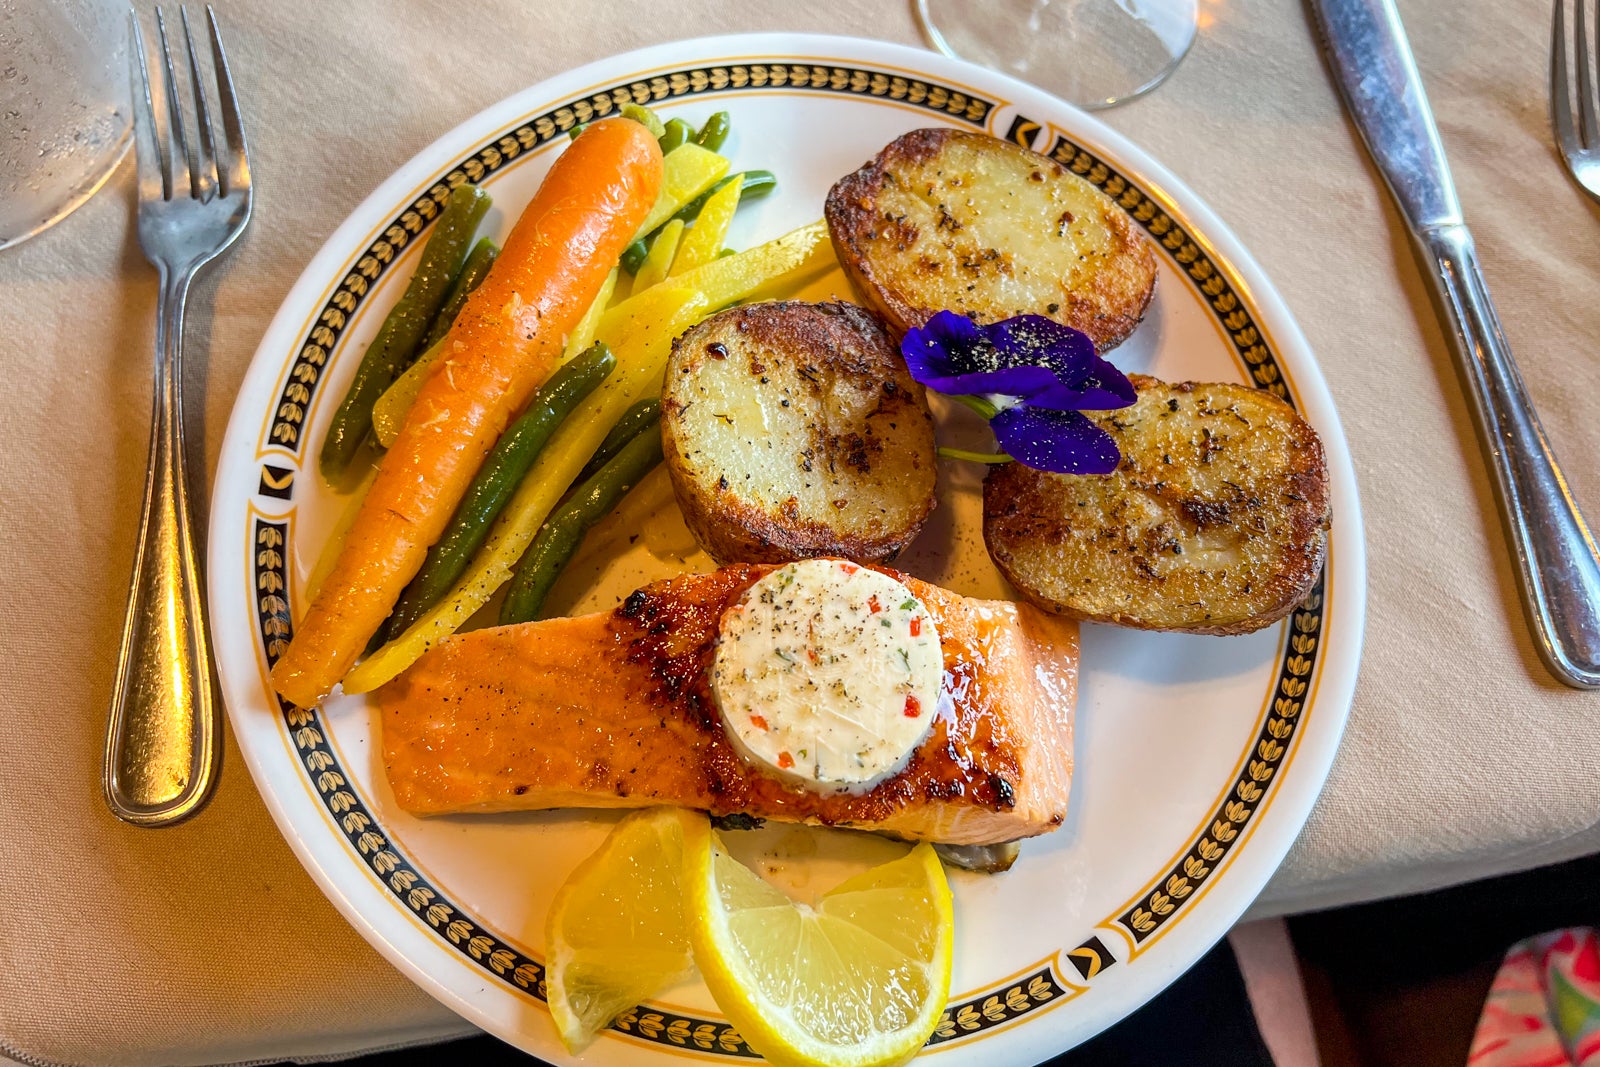 Salmon, potatoes and vegetables in the dining car at the Train Station Inn in Tatamagouche, Nova Scotia